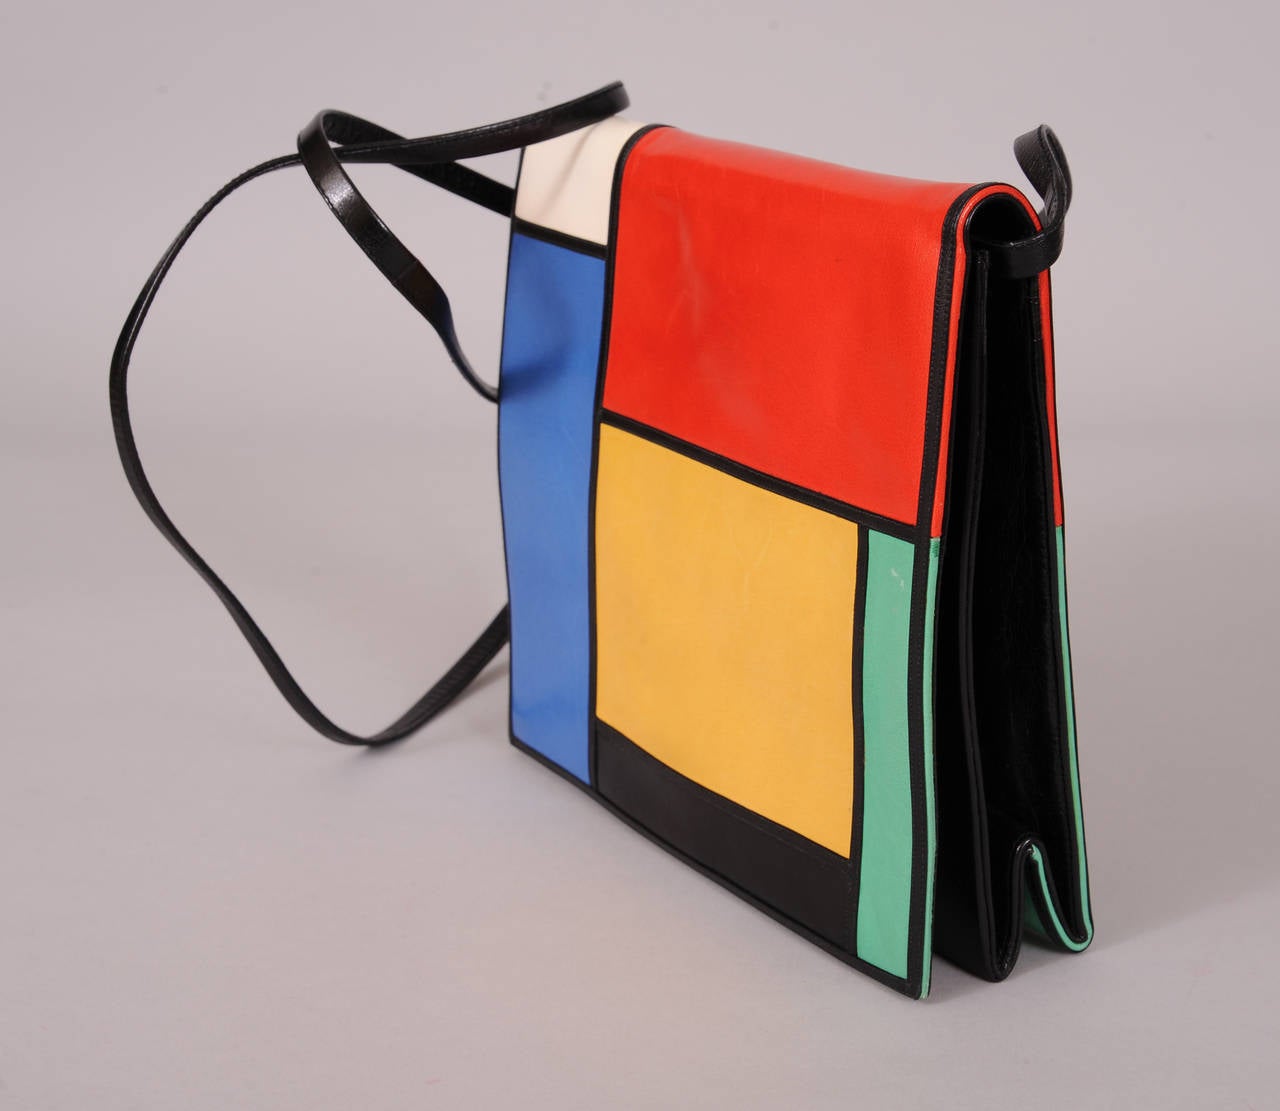 Inspired by the colorful artwork of Mondrian this bag is composed of bright geometric shapes bordered by black leather. The removable shoulder strap and the interior flap are black leather. The body of the bag is beige suede. There is a zippered